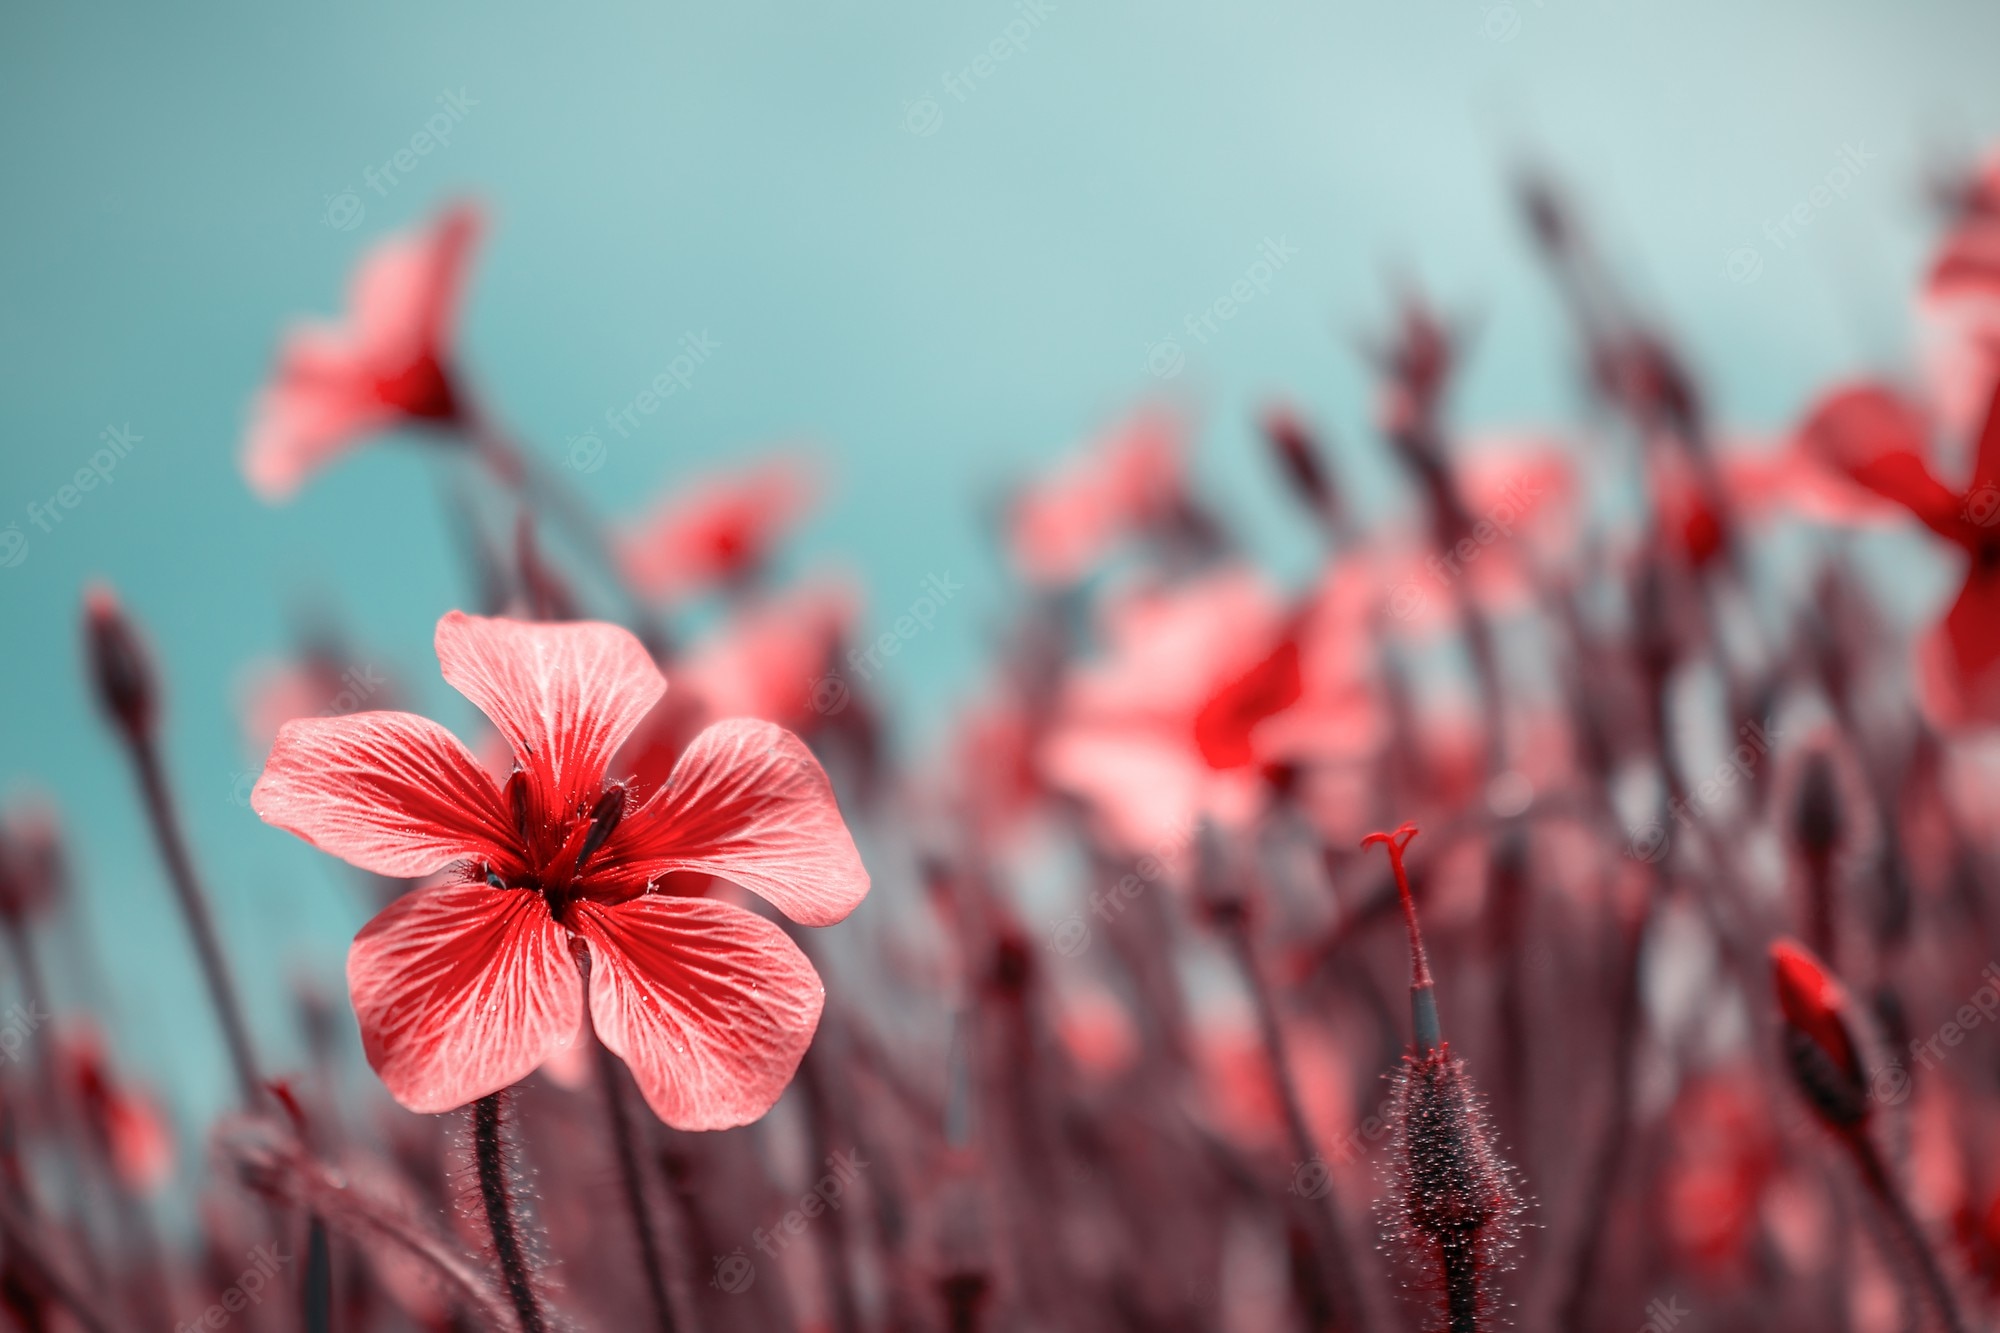 Premium Photo. Beautiful red flowers in spring nature, soft focus. magic colorful artistic image tenderness of nature, spring floral wallpaper